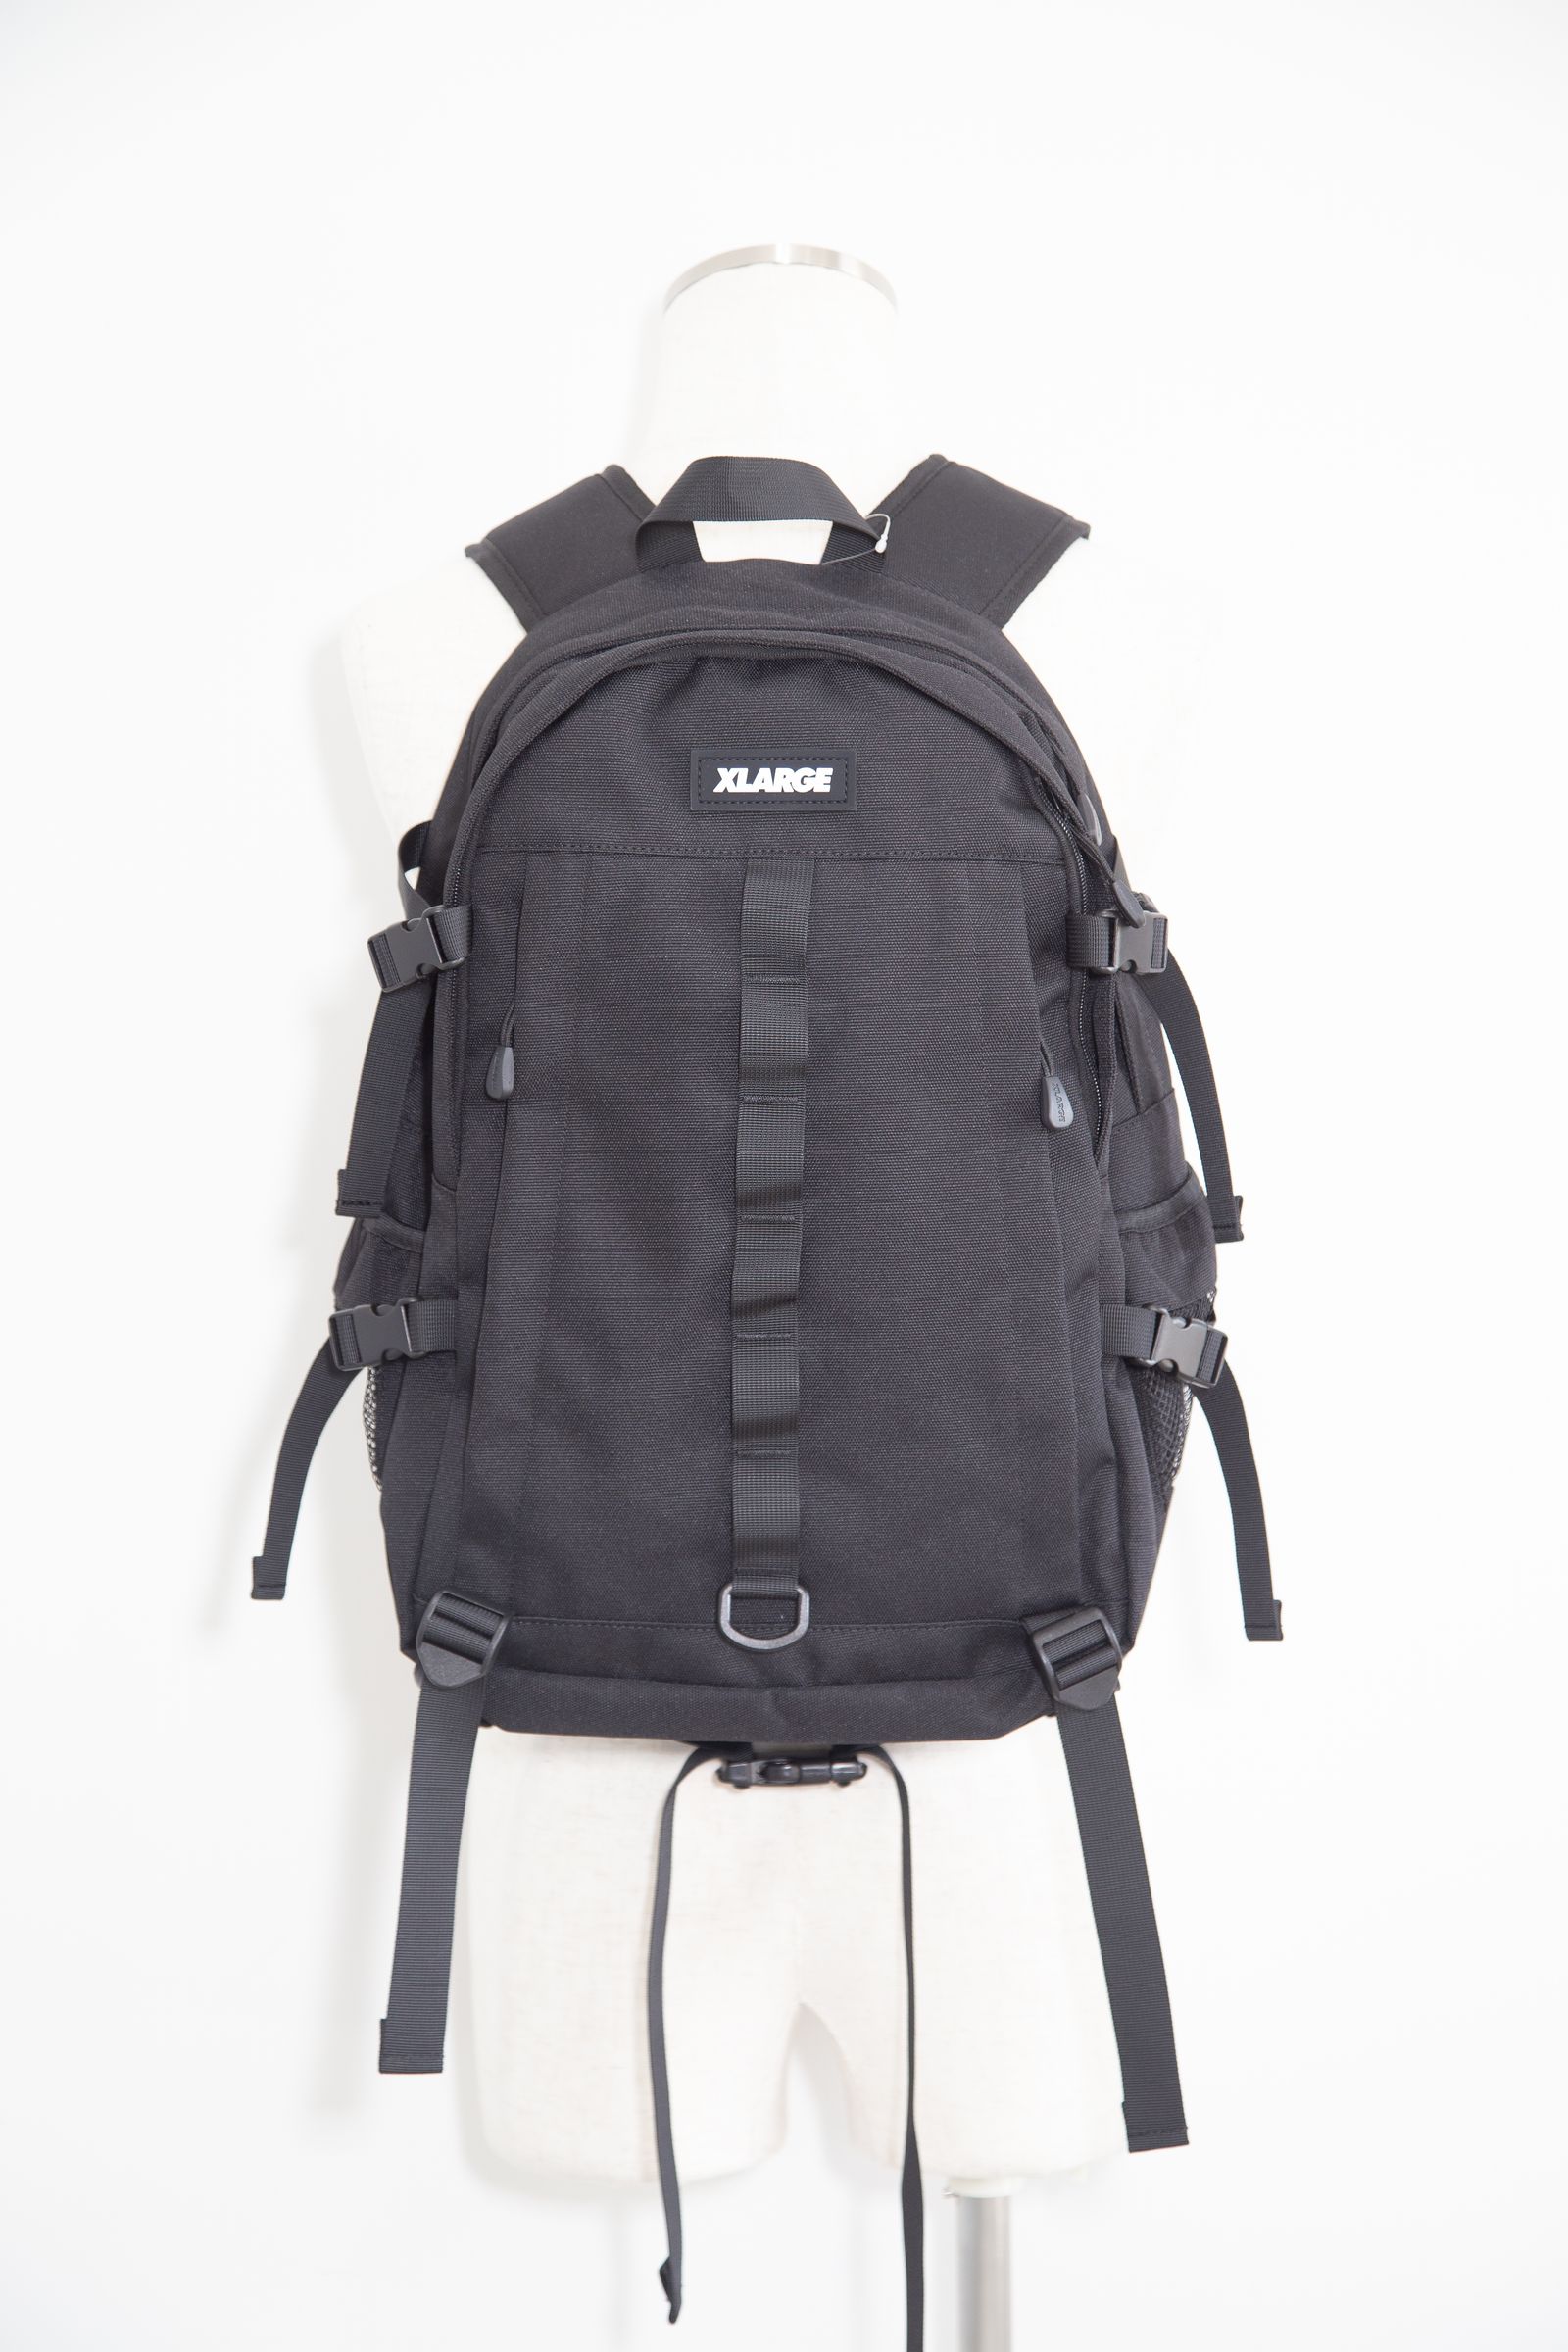 MILITARY BACKPACK / ブラック - ONE SIZE